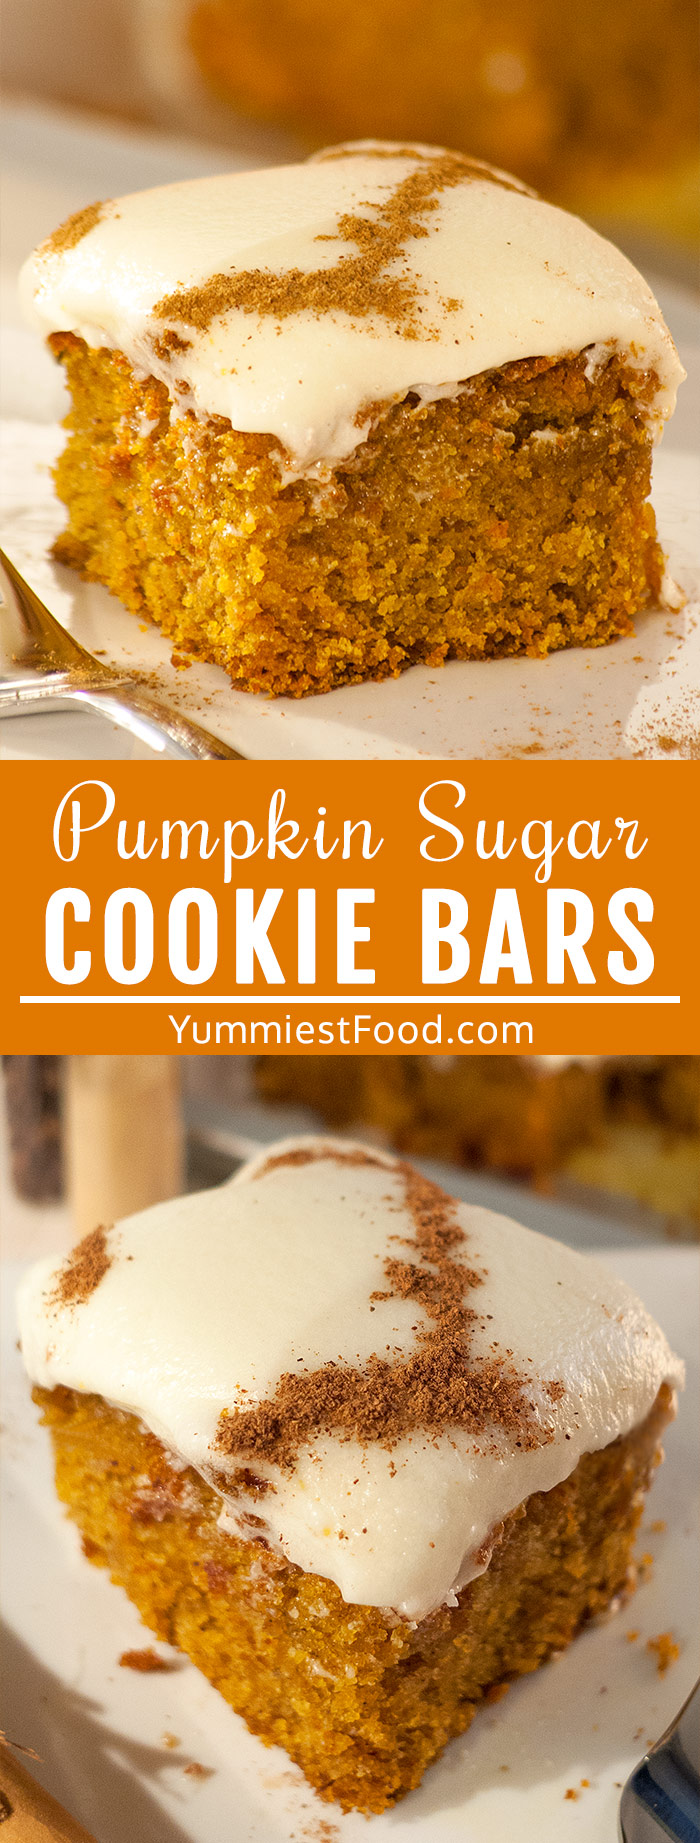 Pumpkin Sugar Cookie Bars with Cream Cheese Frosting - Made of homemade pumpkin puree and topped with cream cheese frosting